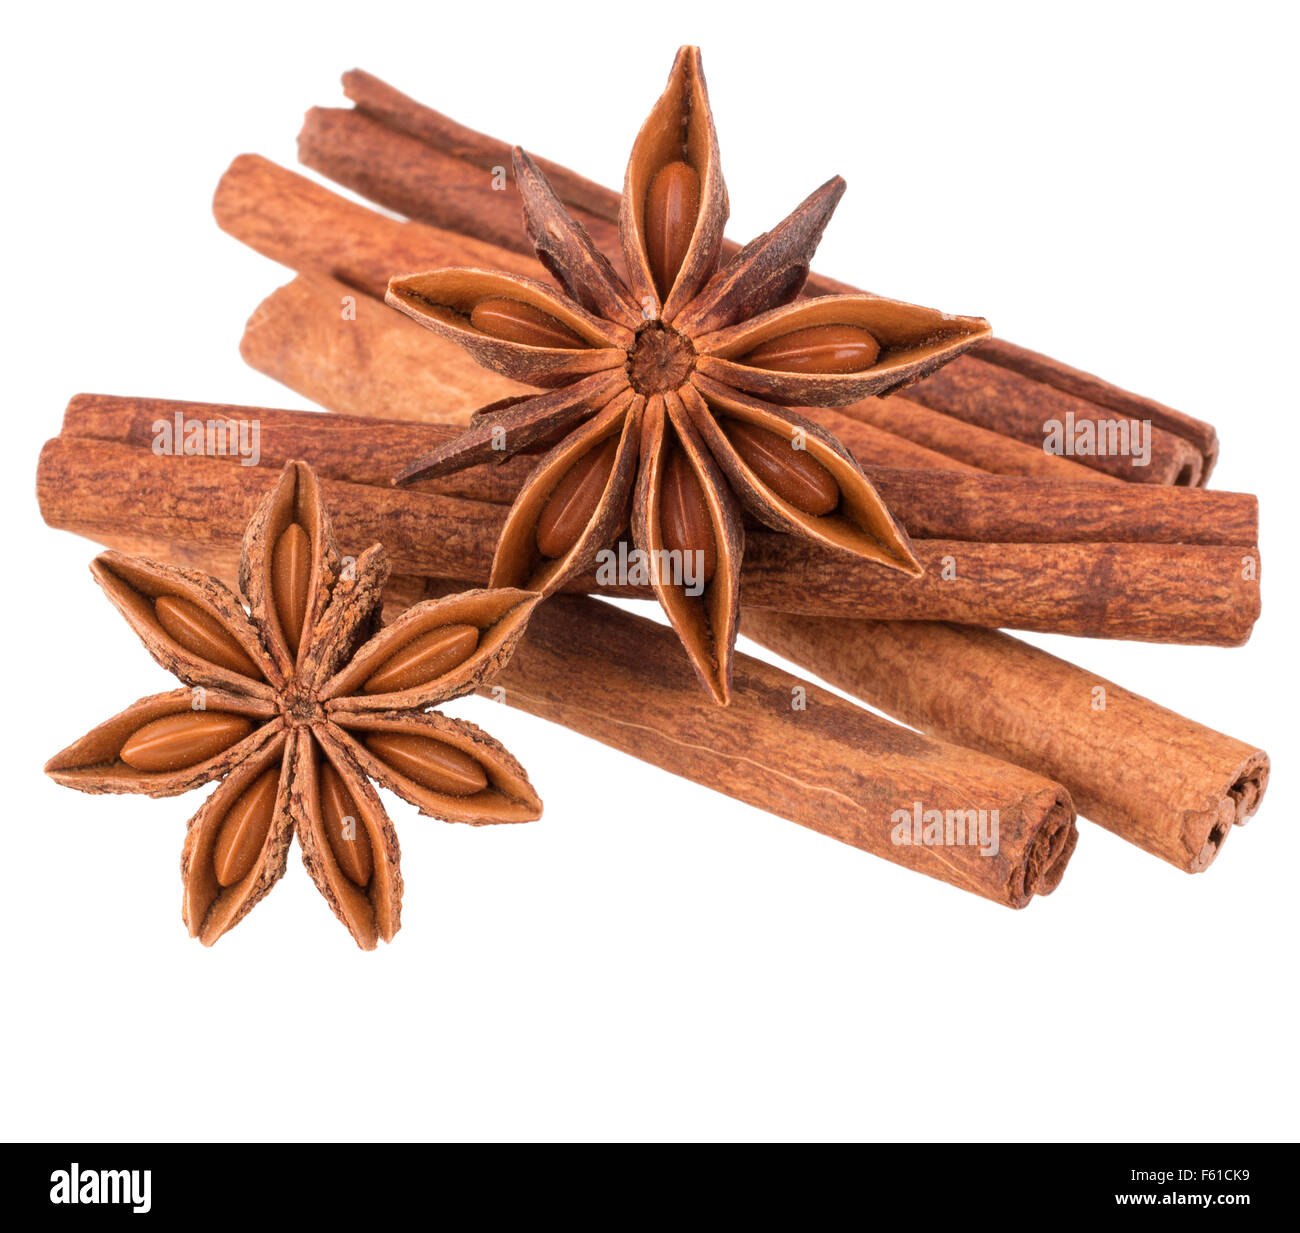 cinnamon stick and star anise spice isolated on white background closeup Stock Photo